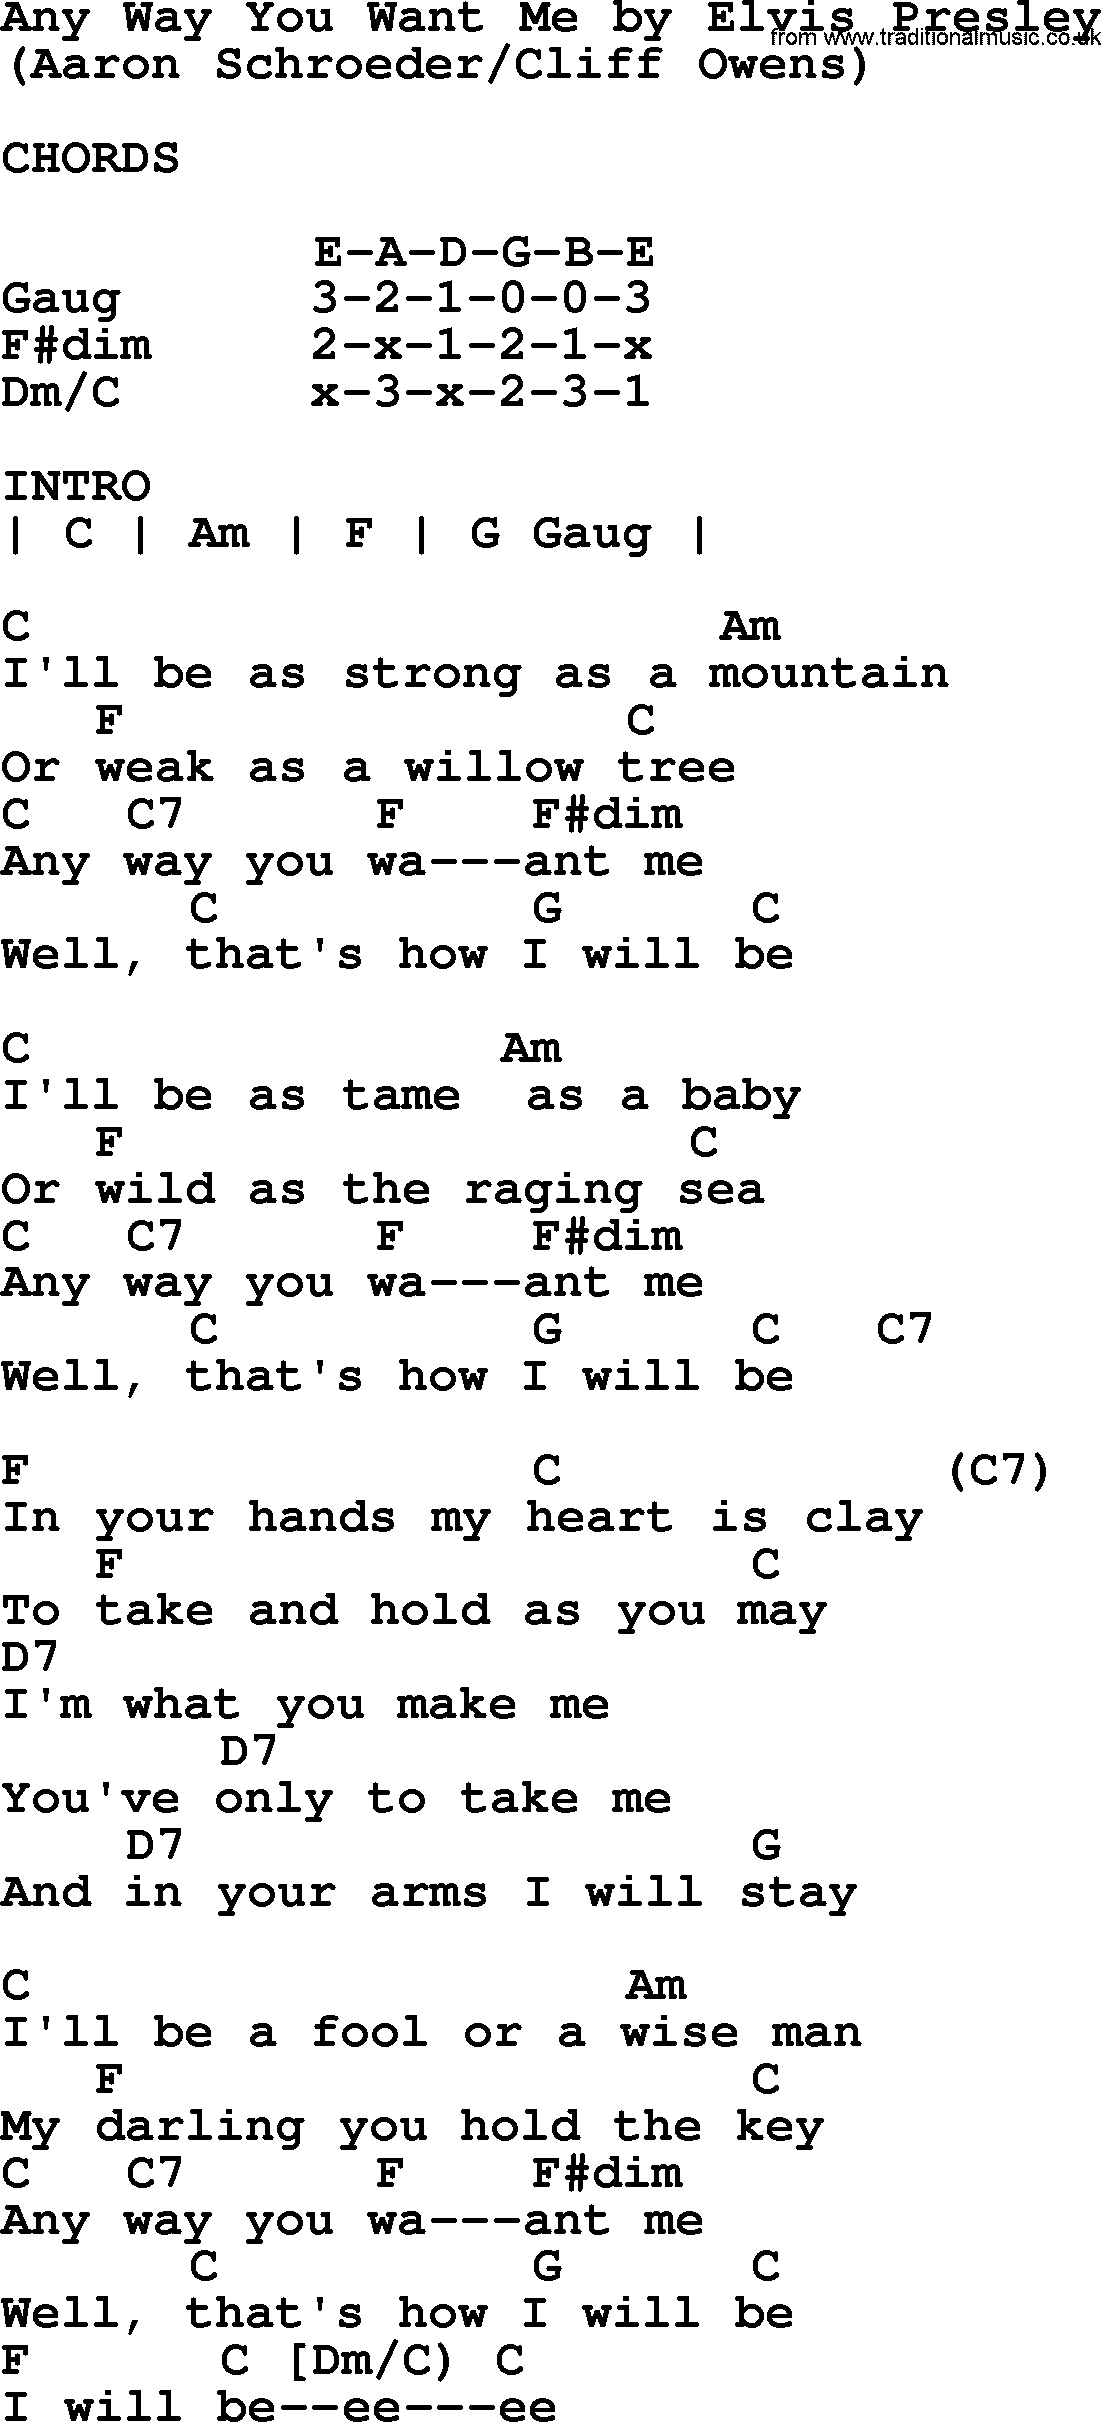 Elvis Presley song: Any Way You Want Me, lyrics and chords